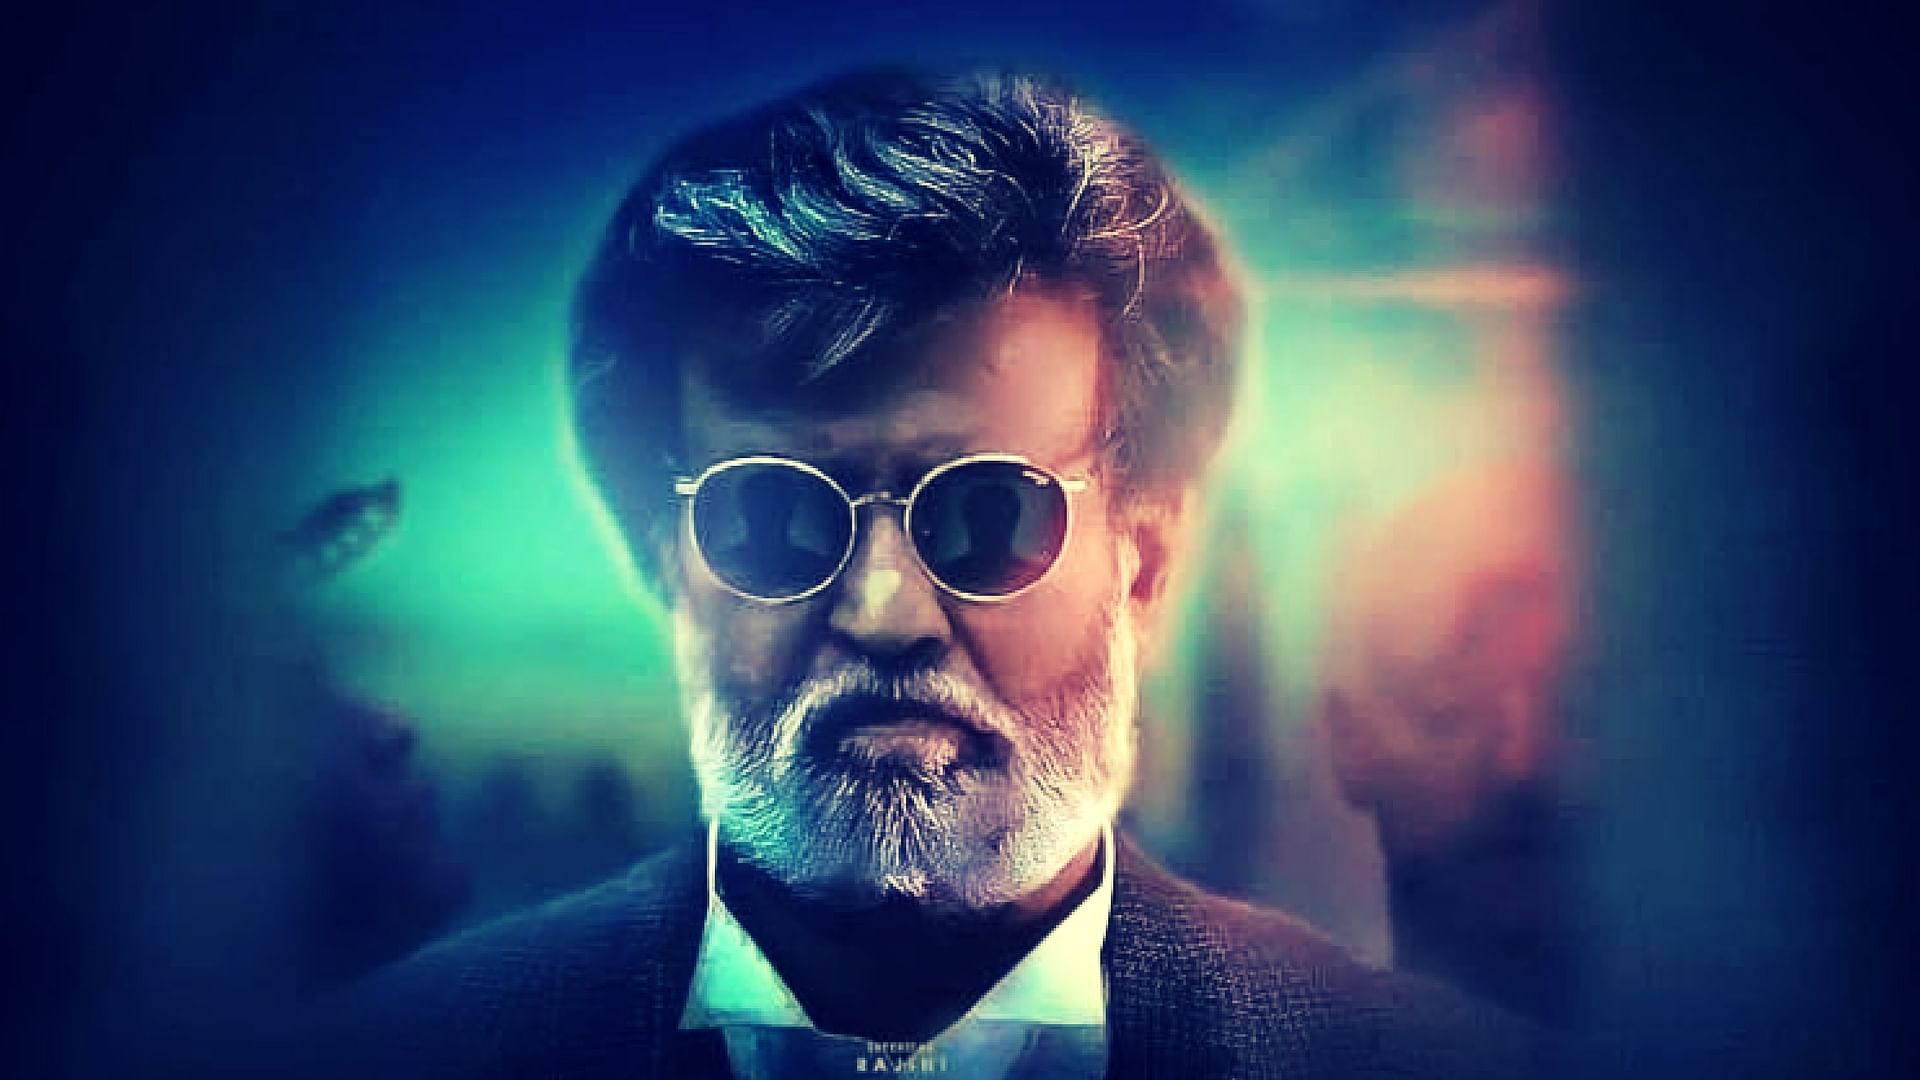 kabali theater list Archives - onlookersmedia